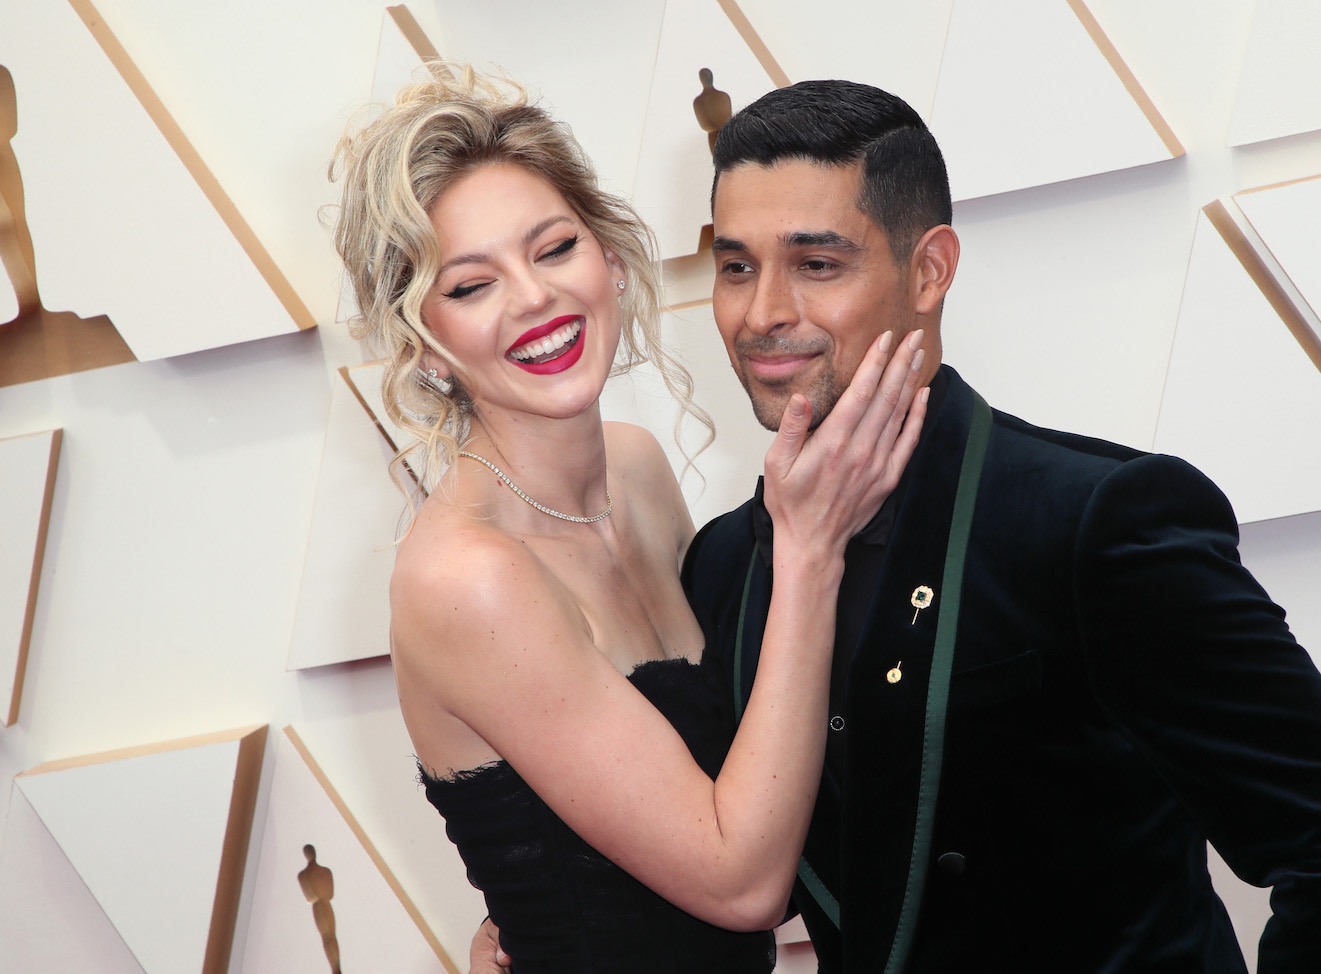 Amanda Pacheco and Wilmer Valderrama smiling at an event